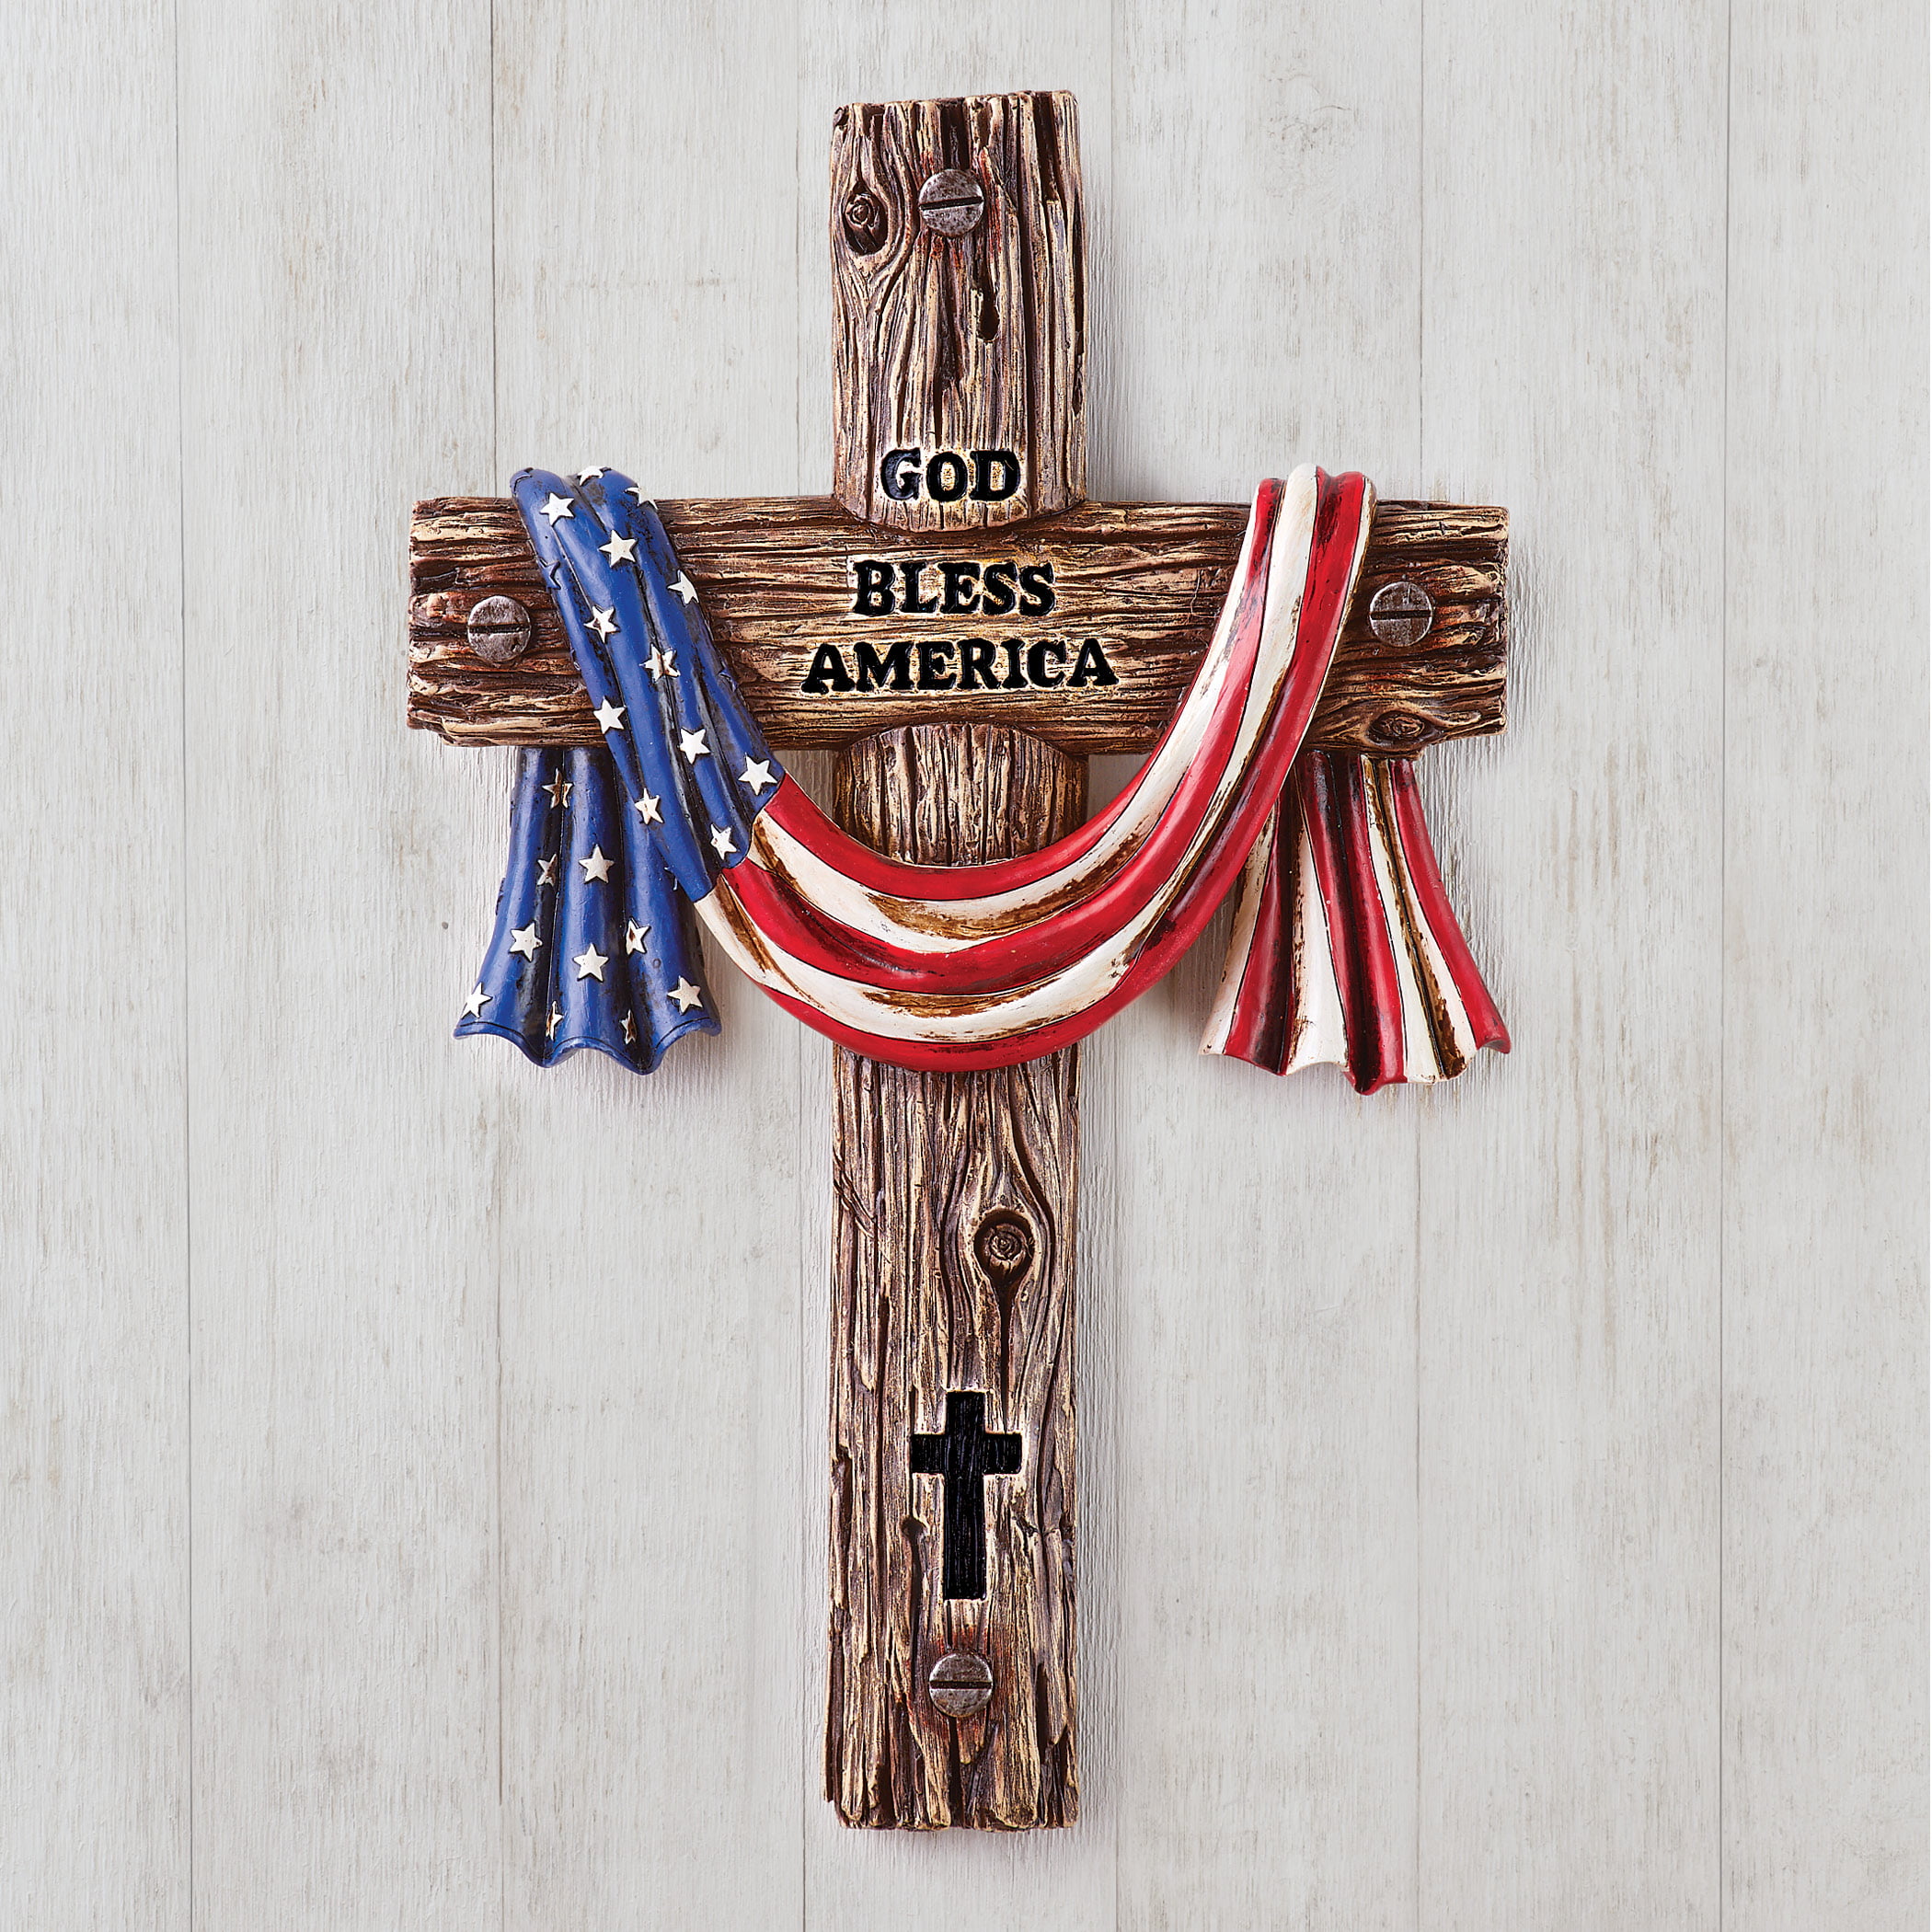 God Bless America Hand-Painted Cross with Draped Flag Hand-Painted Wall Déc...